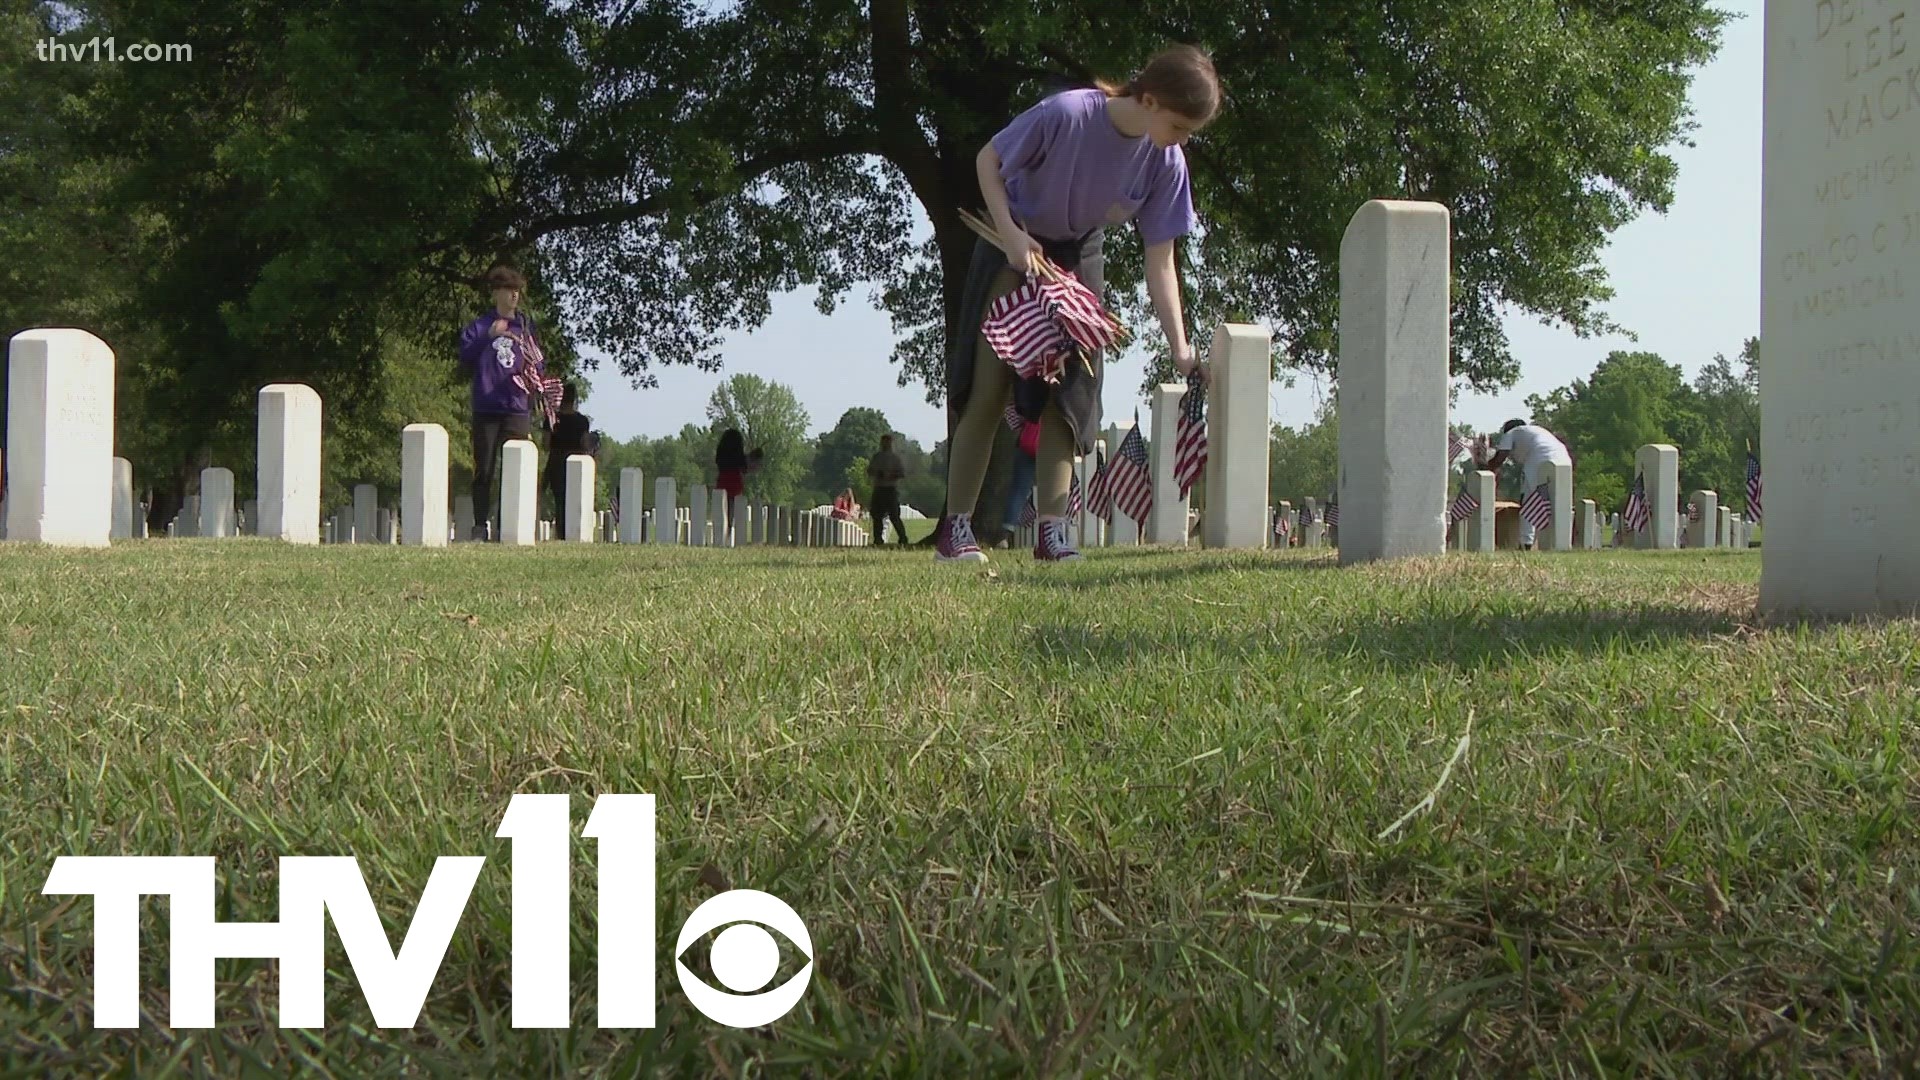 Memorial Day weekend is a time to reflect on the sacrifices of armed forces members. On Friday, middle school students got involved at a Little Rock cemetery.